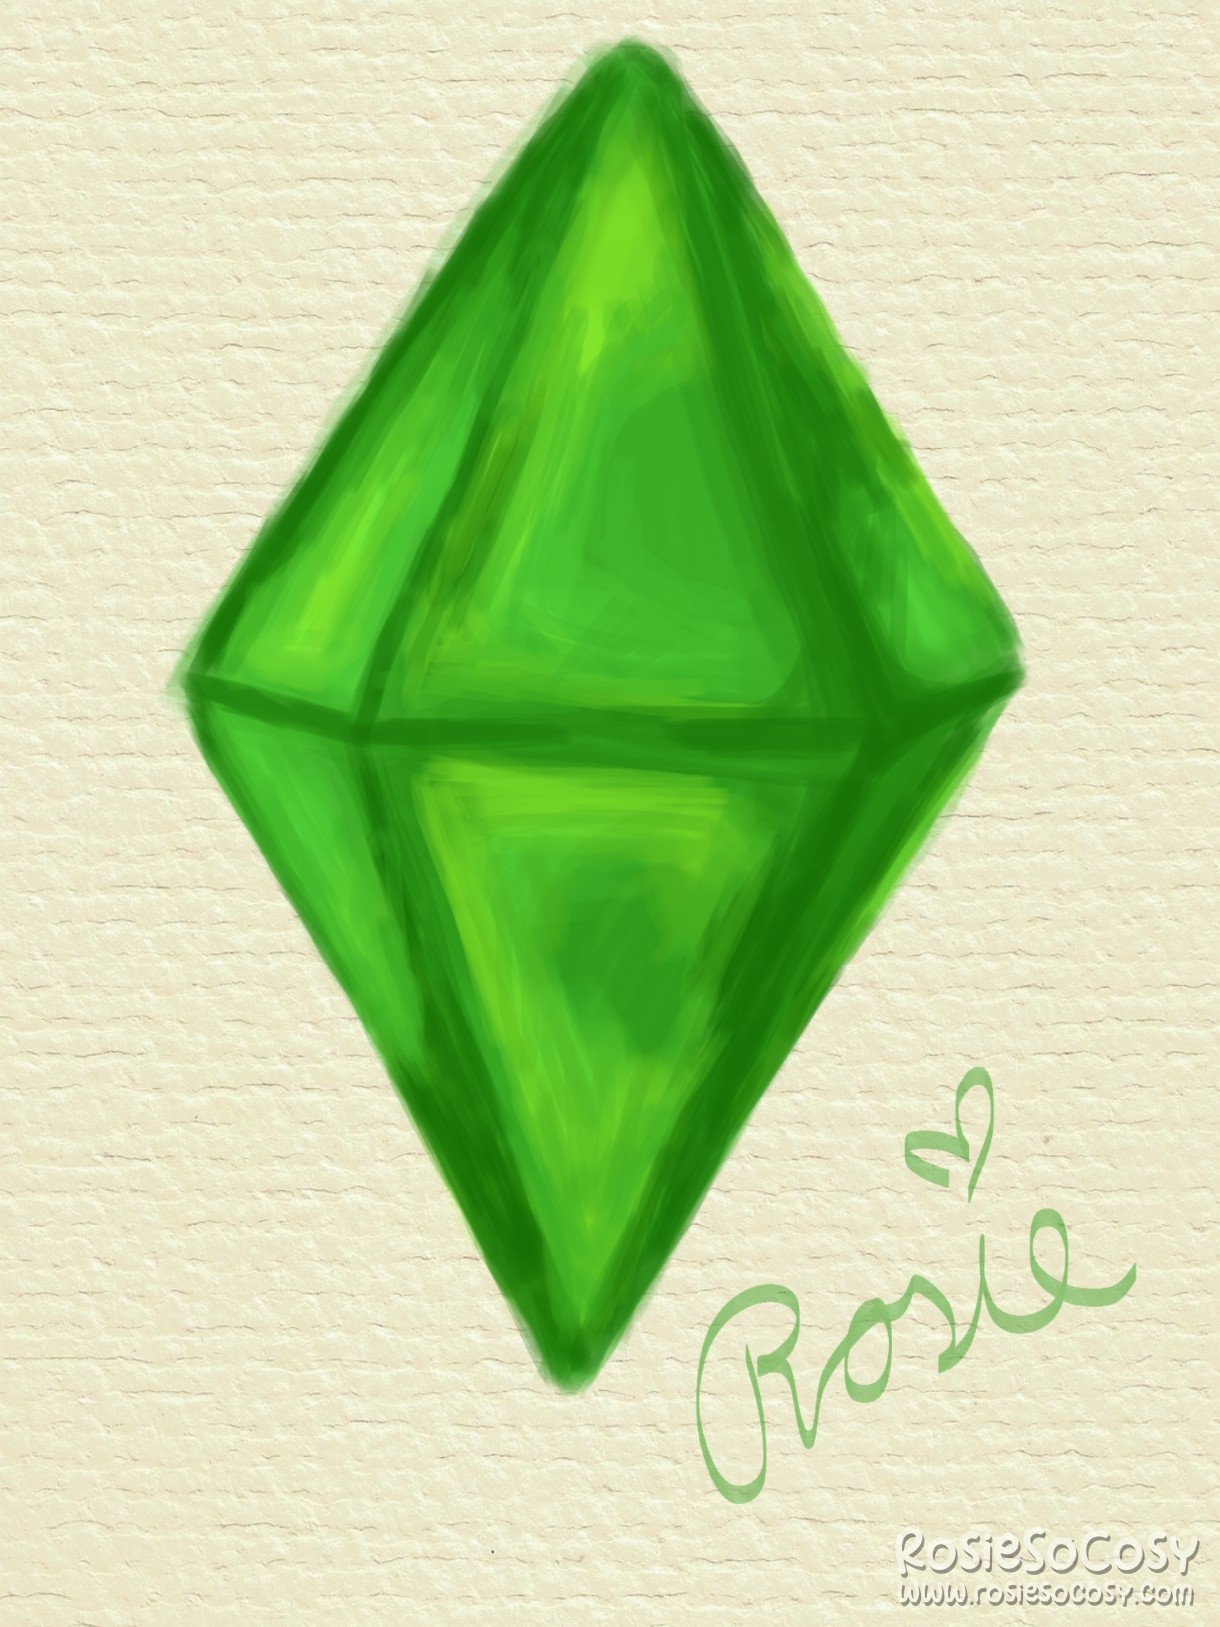 A green plumbob from The Sims